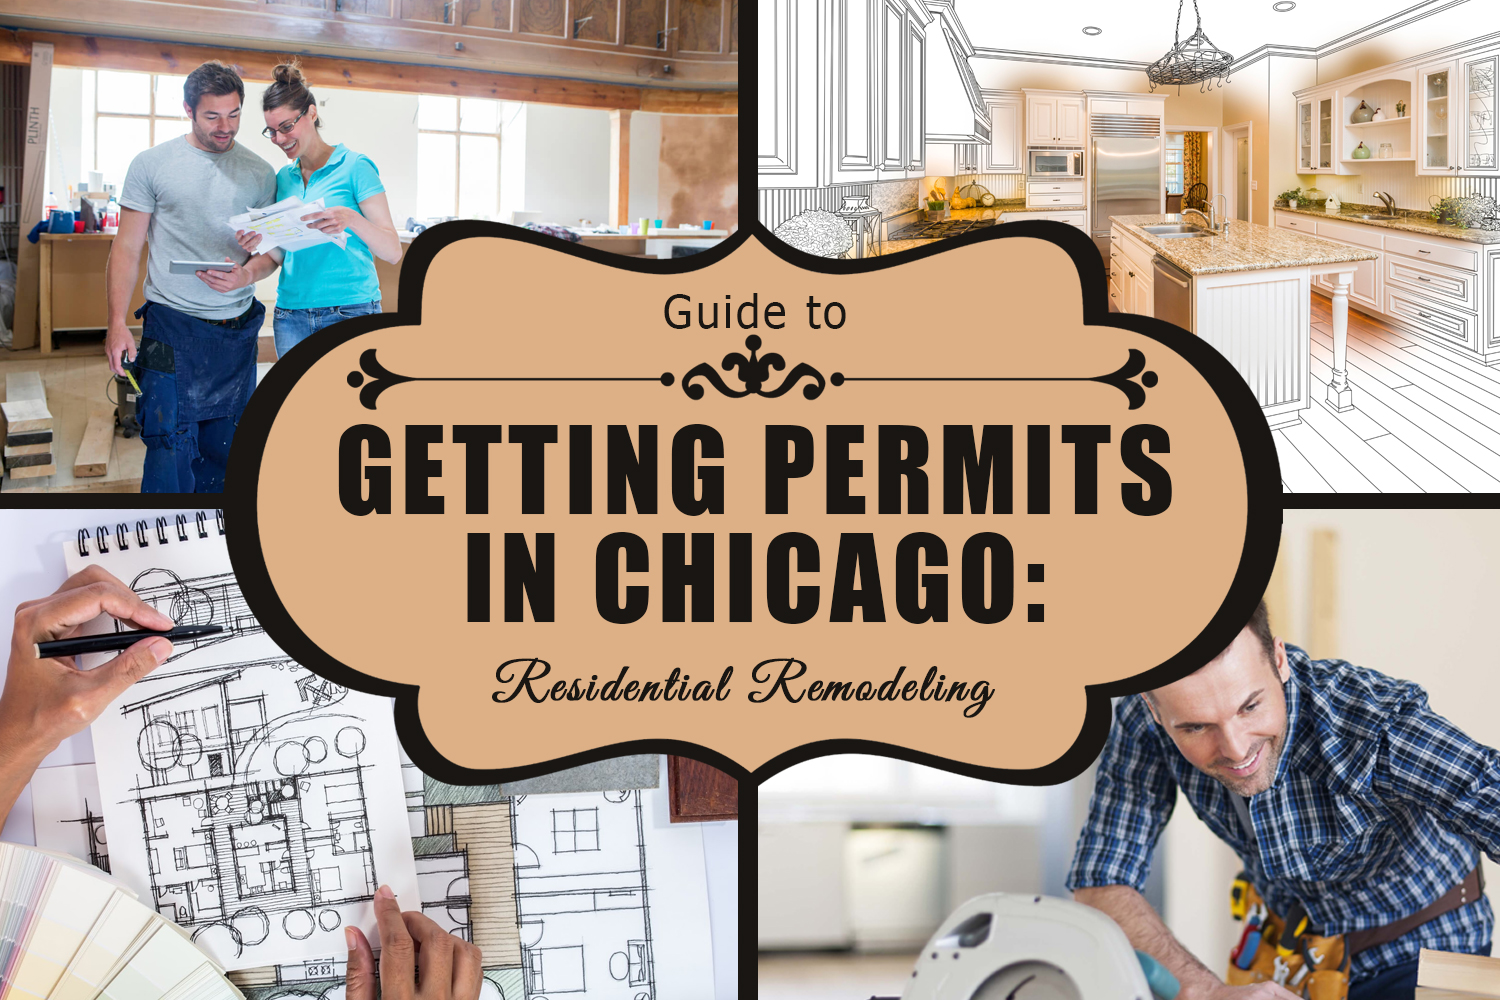 Guide To Getting Permits In Chicago: Residential Remodeling